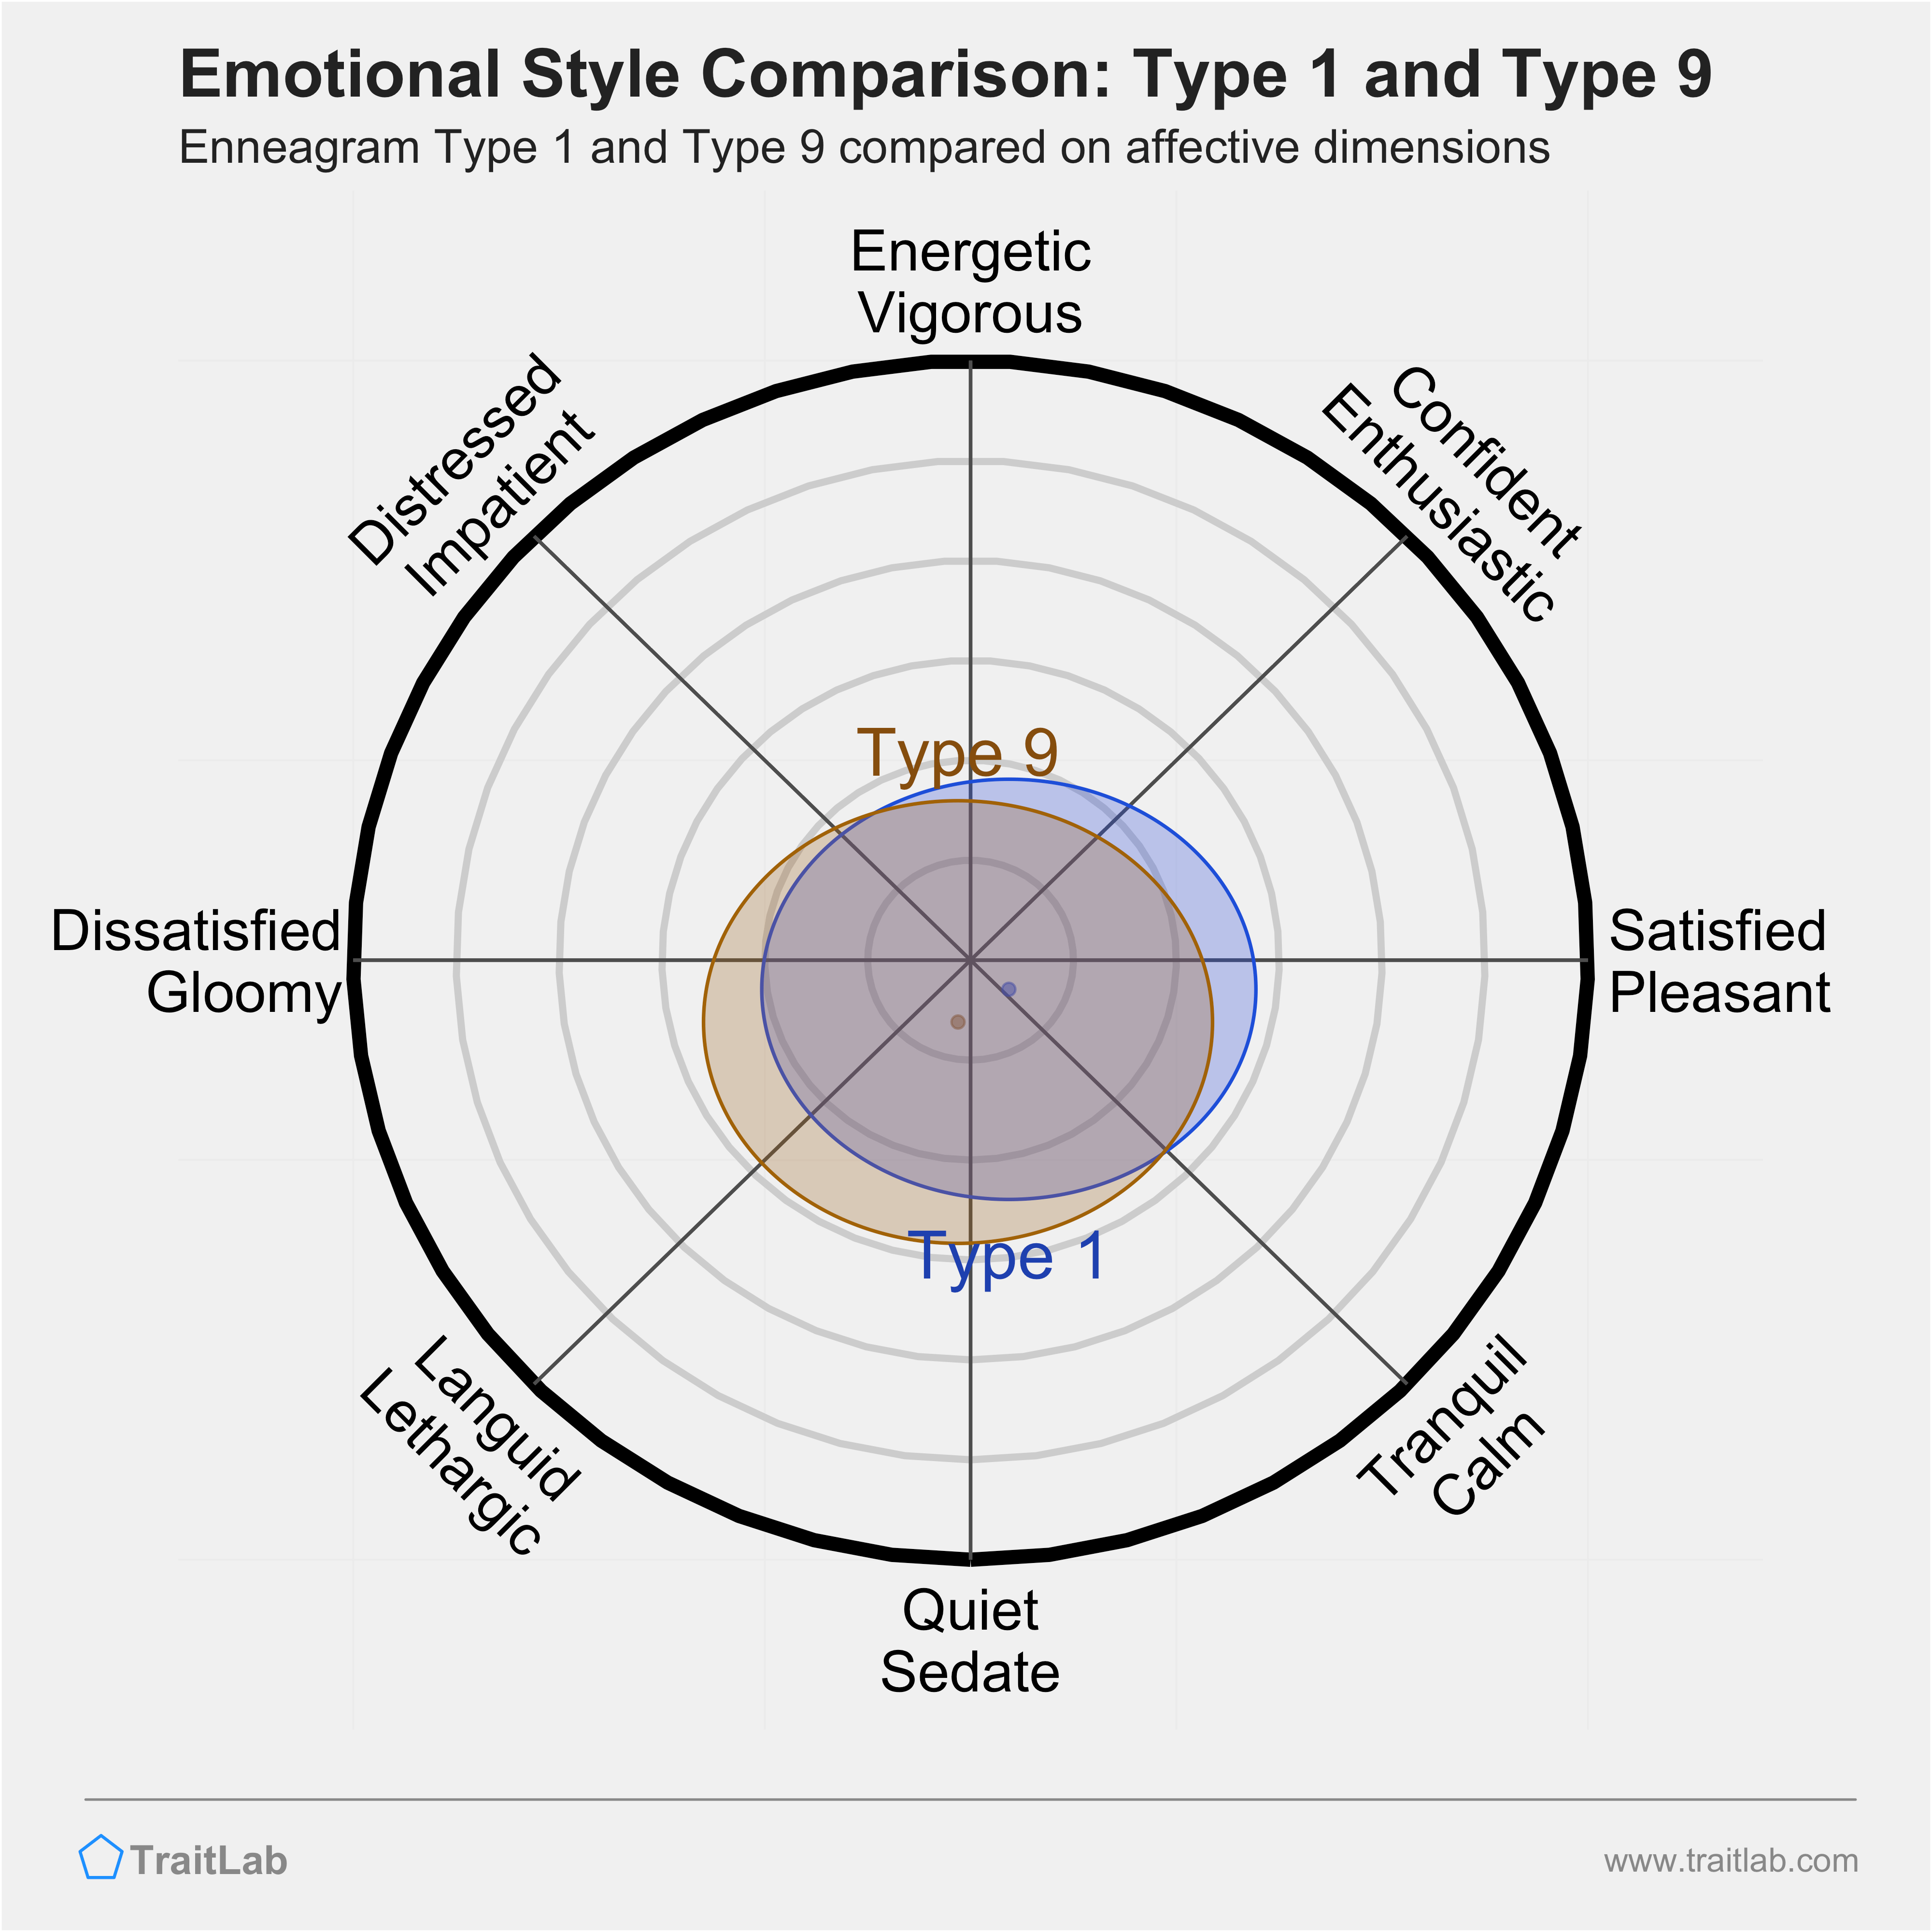 Type 1 and Type 9 comparison across emotional (affective) dimensions